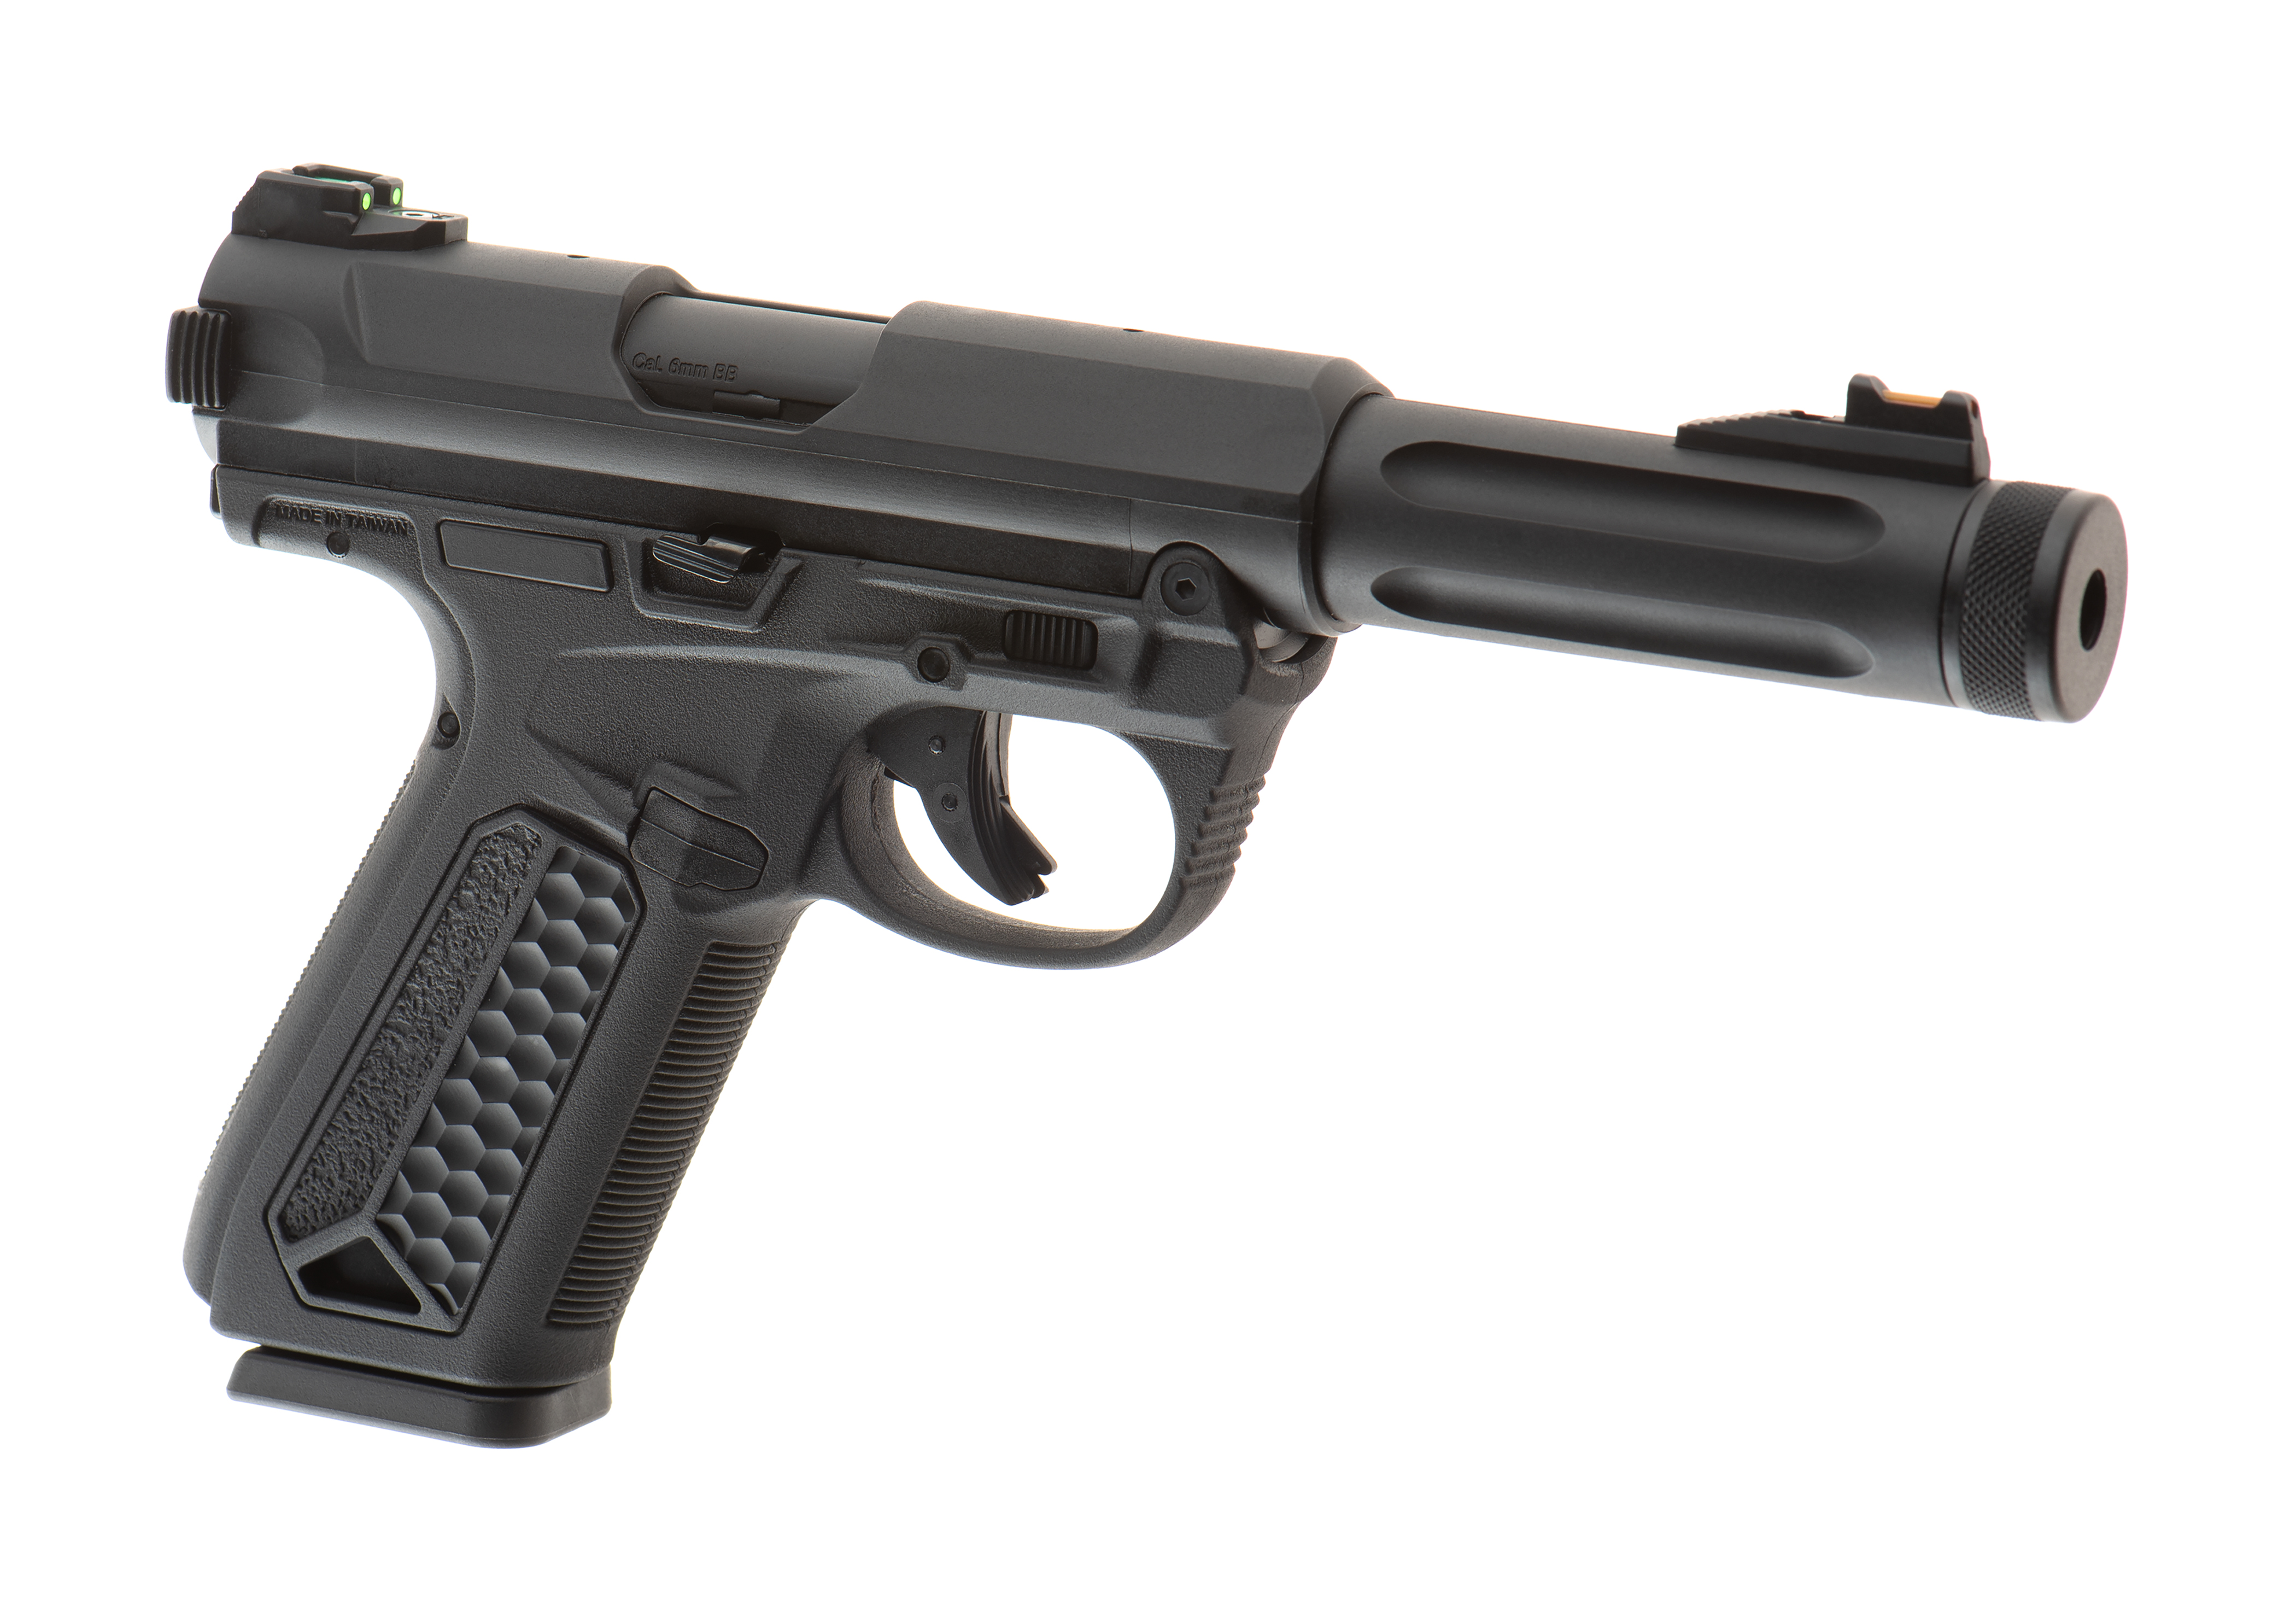 Products » Airsoft » CO₂ » 2.6439 » 17 Gen5 »